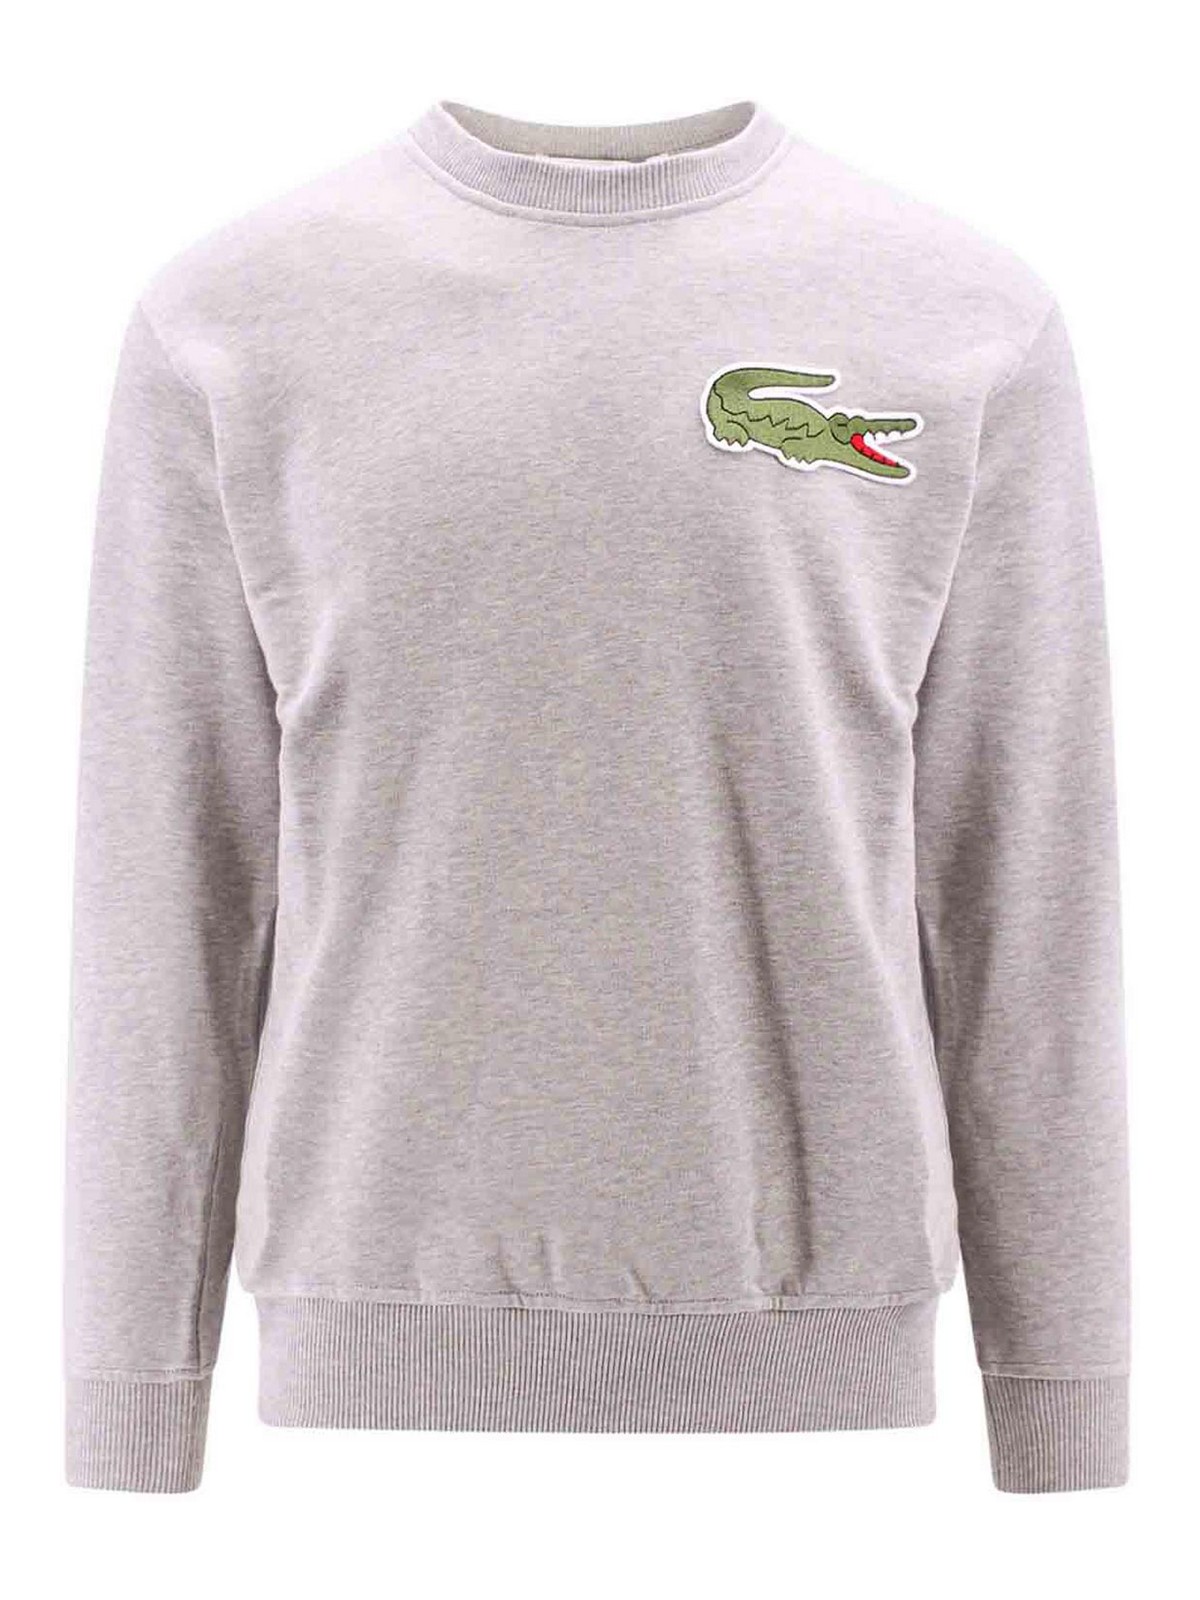 Comme Des Garçons Shirt Cotton Sweatshirt With Frontal Lacoste Patch In Gray